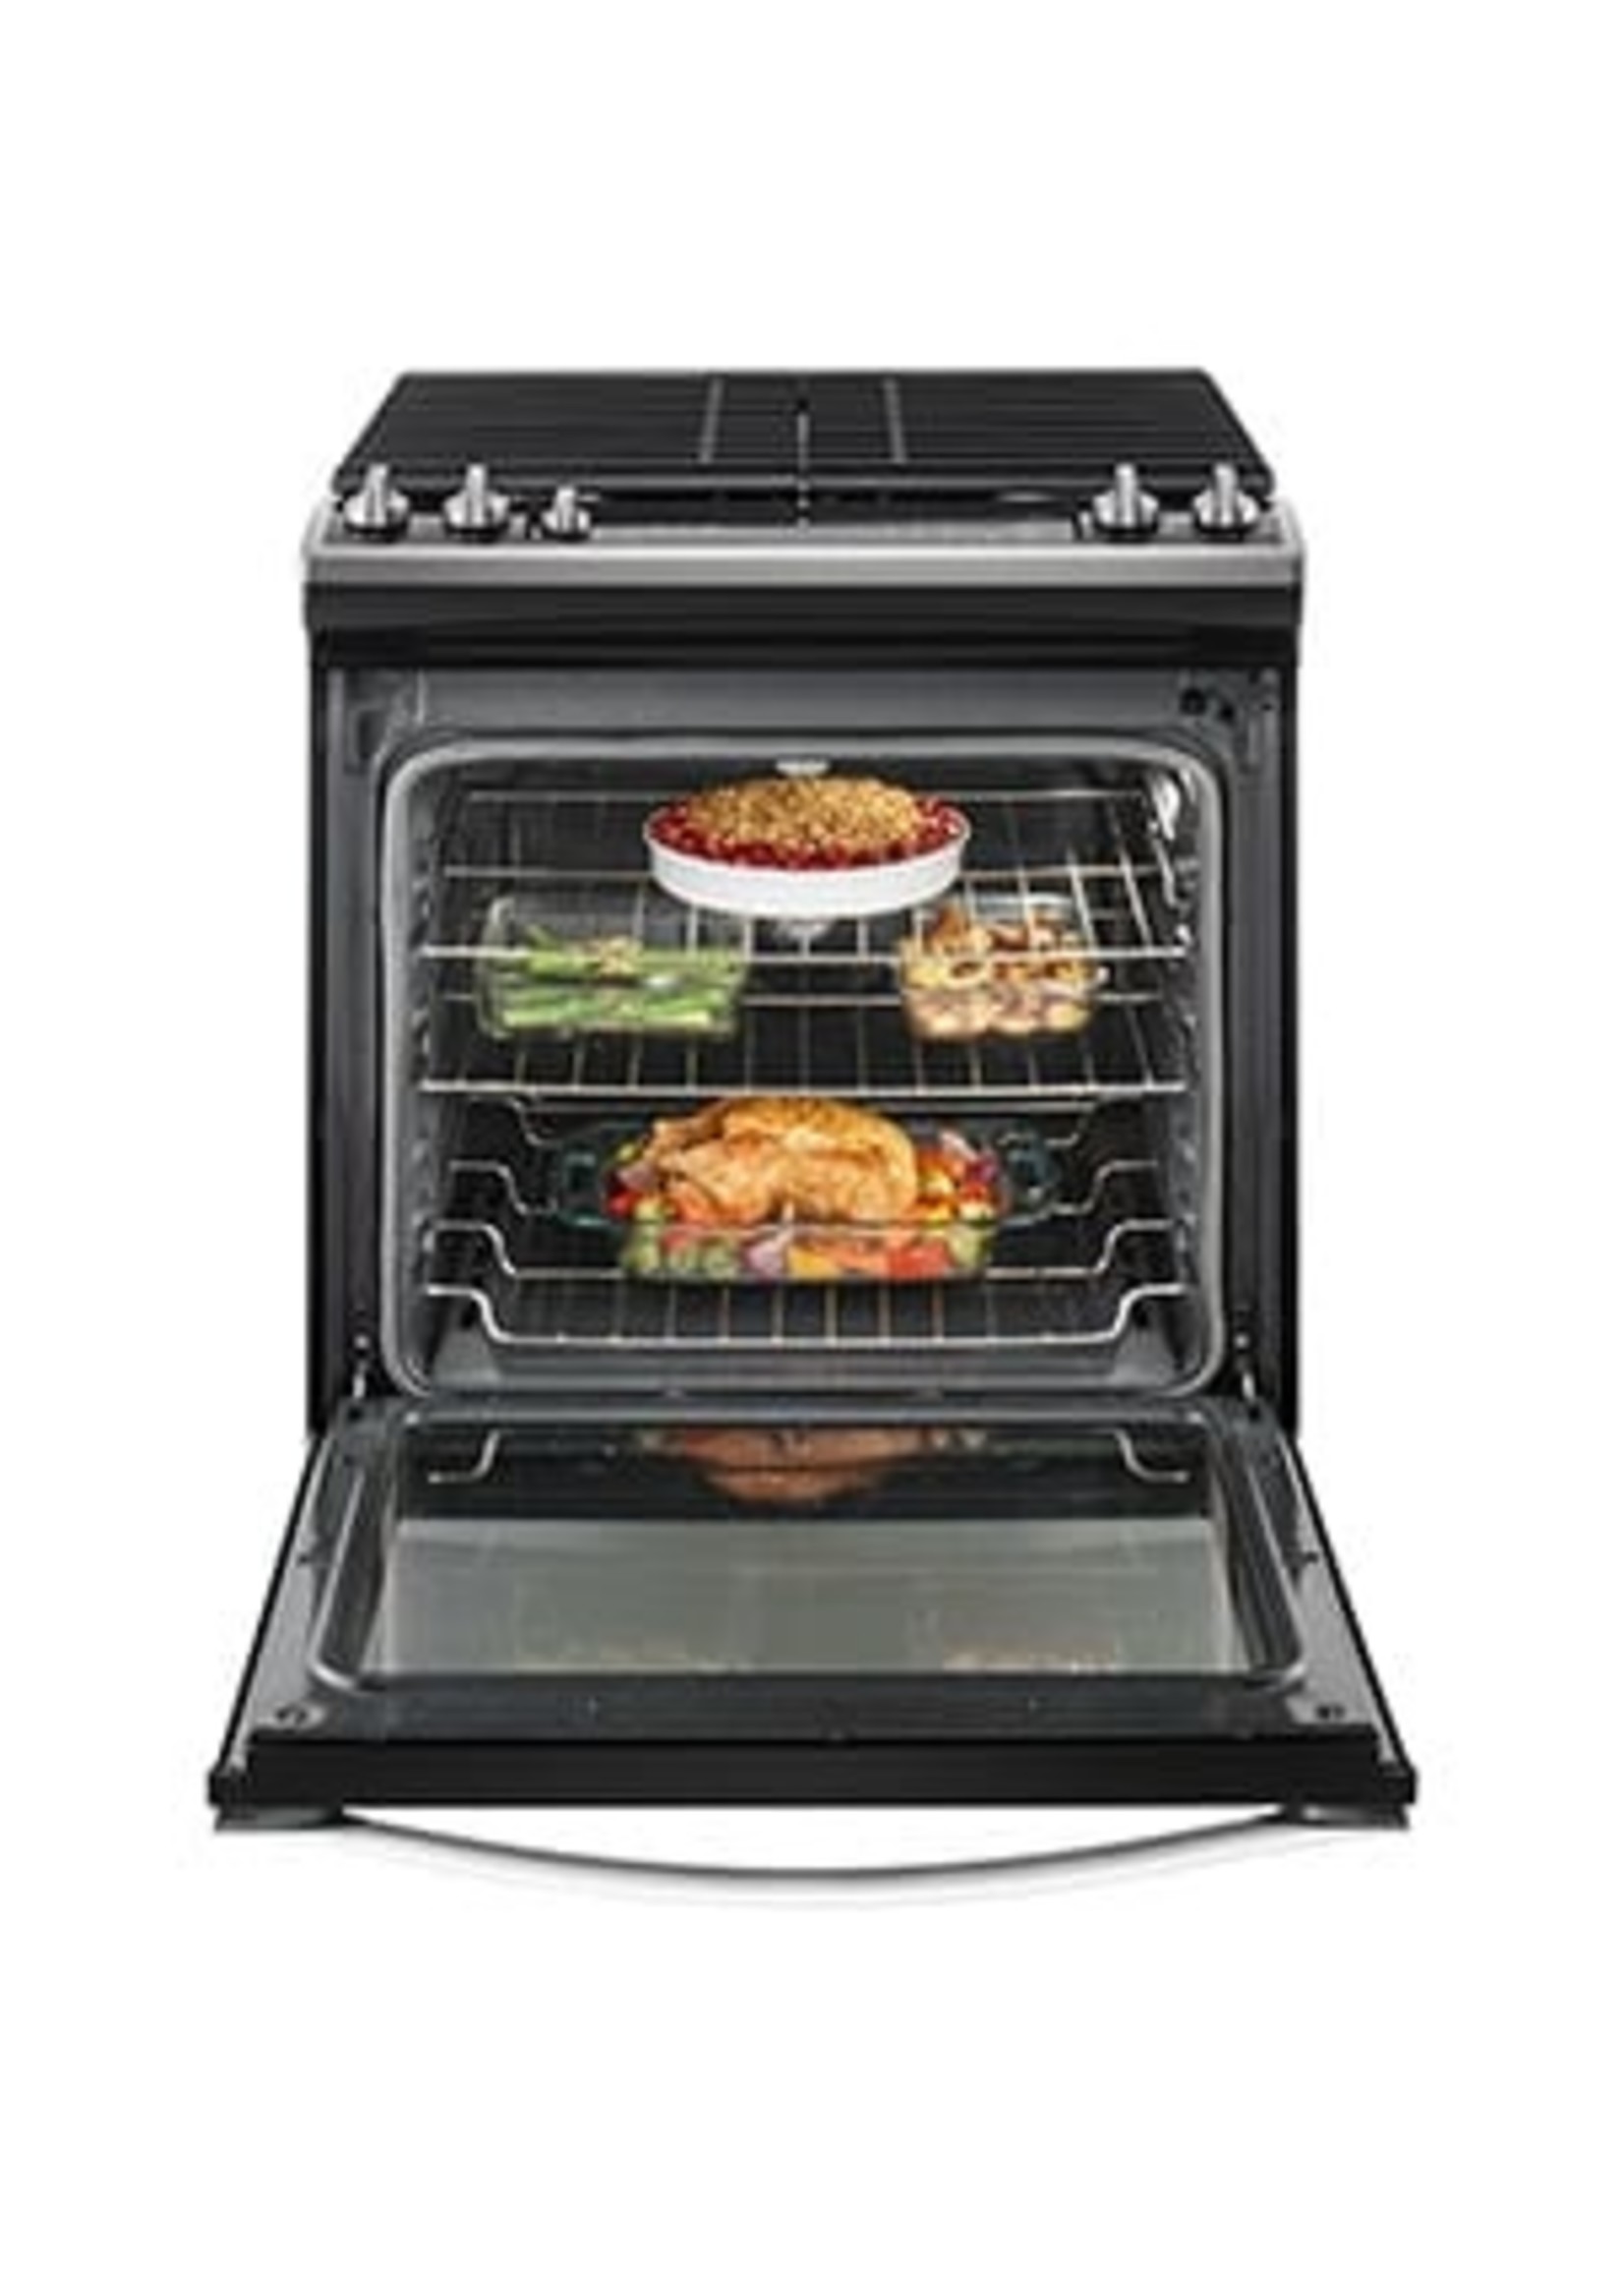 Whirlpool Whirlpool 5.8 cu. ft. Gas Range with Air Fry Oven in Fingerprint Resistant Stainless Steel